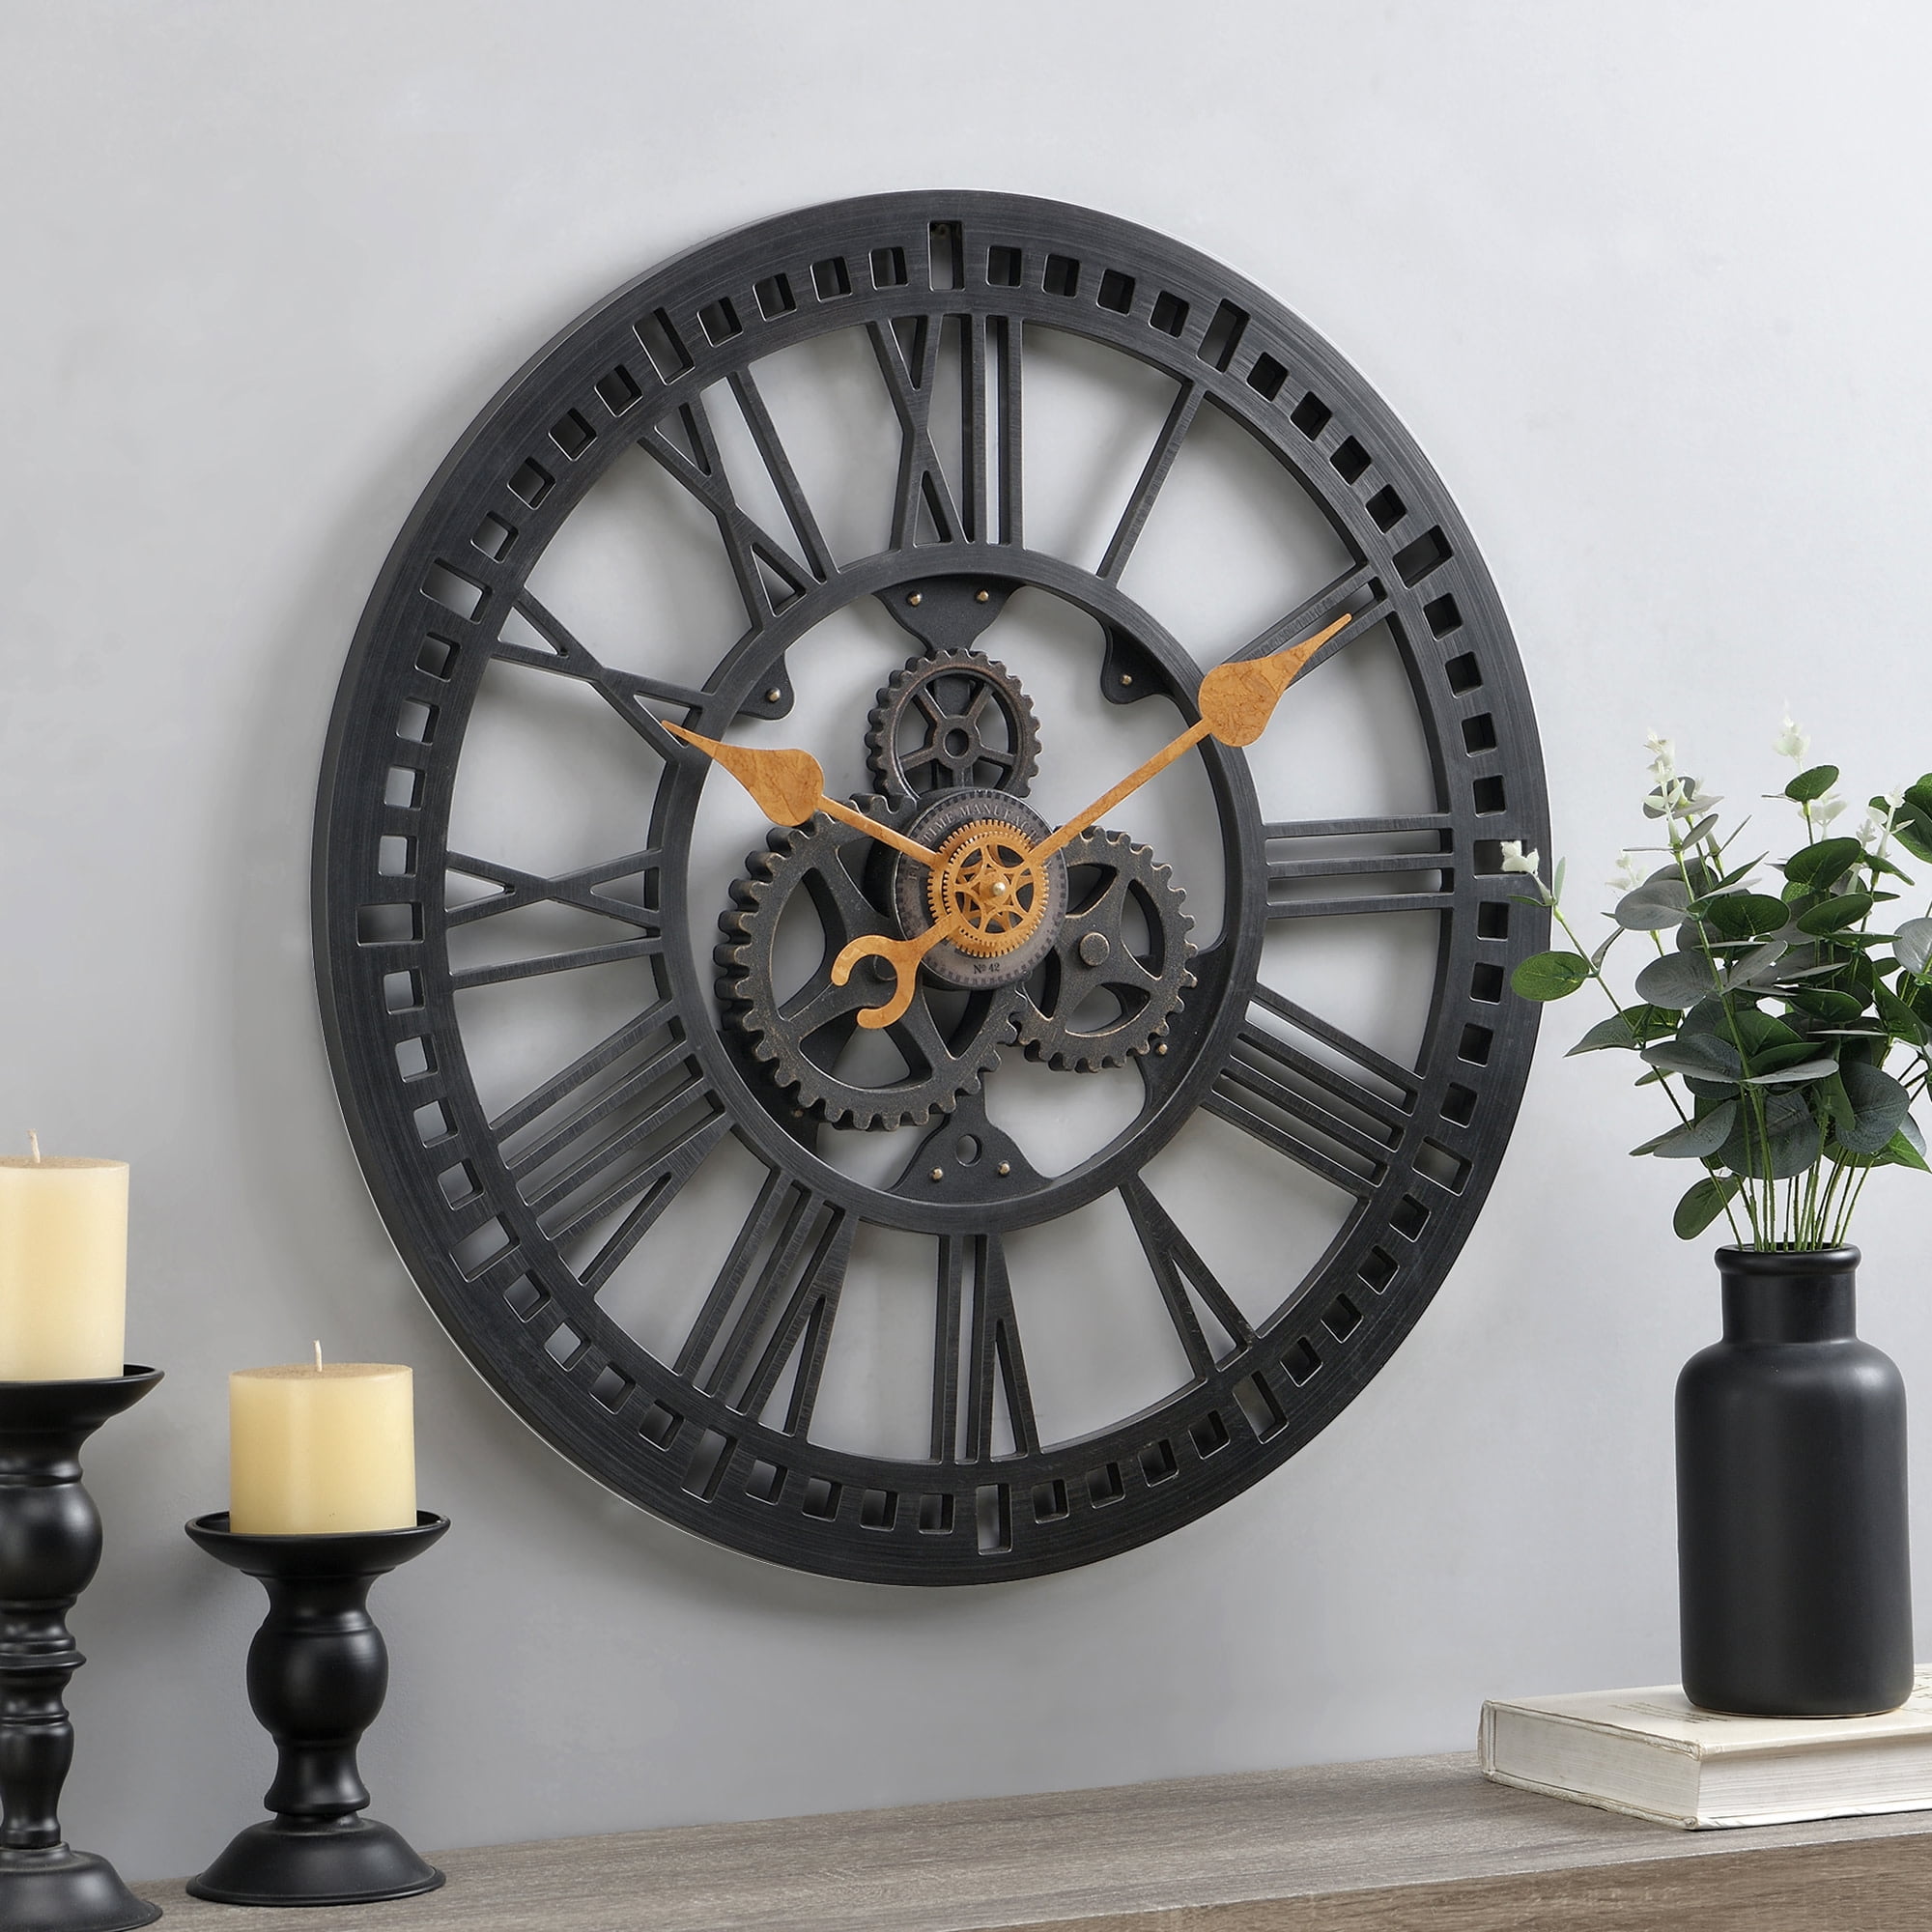 UK suits large format wall clock with fixing Enclosure Hub for clock movement 